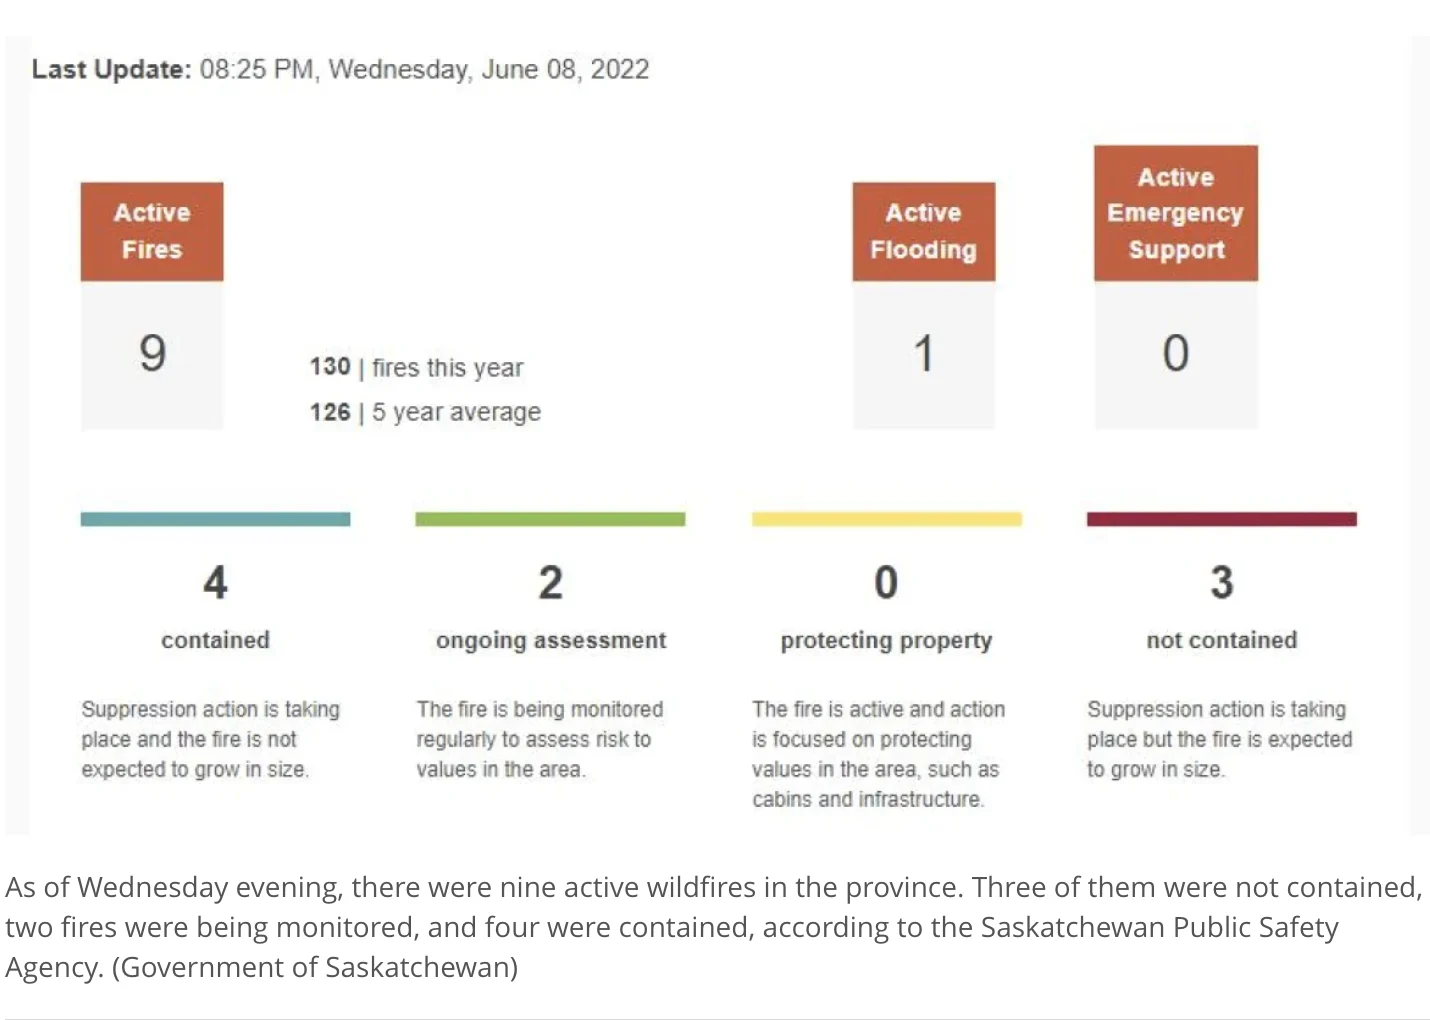 As of Wednesday evening, there were nine active wildfires in the province. Three of them were not contained, two fires were being monitored, and four were contained, according to the Saskatchewan Public Safety Agency. (Government of Saskatchewan)